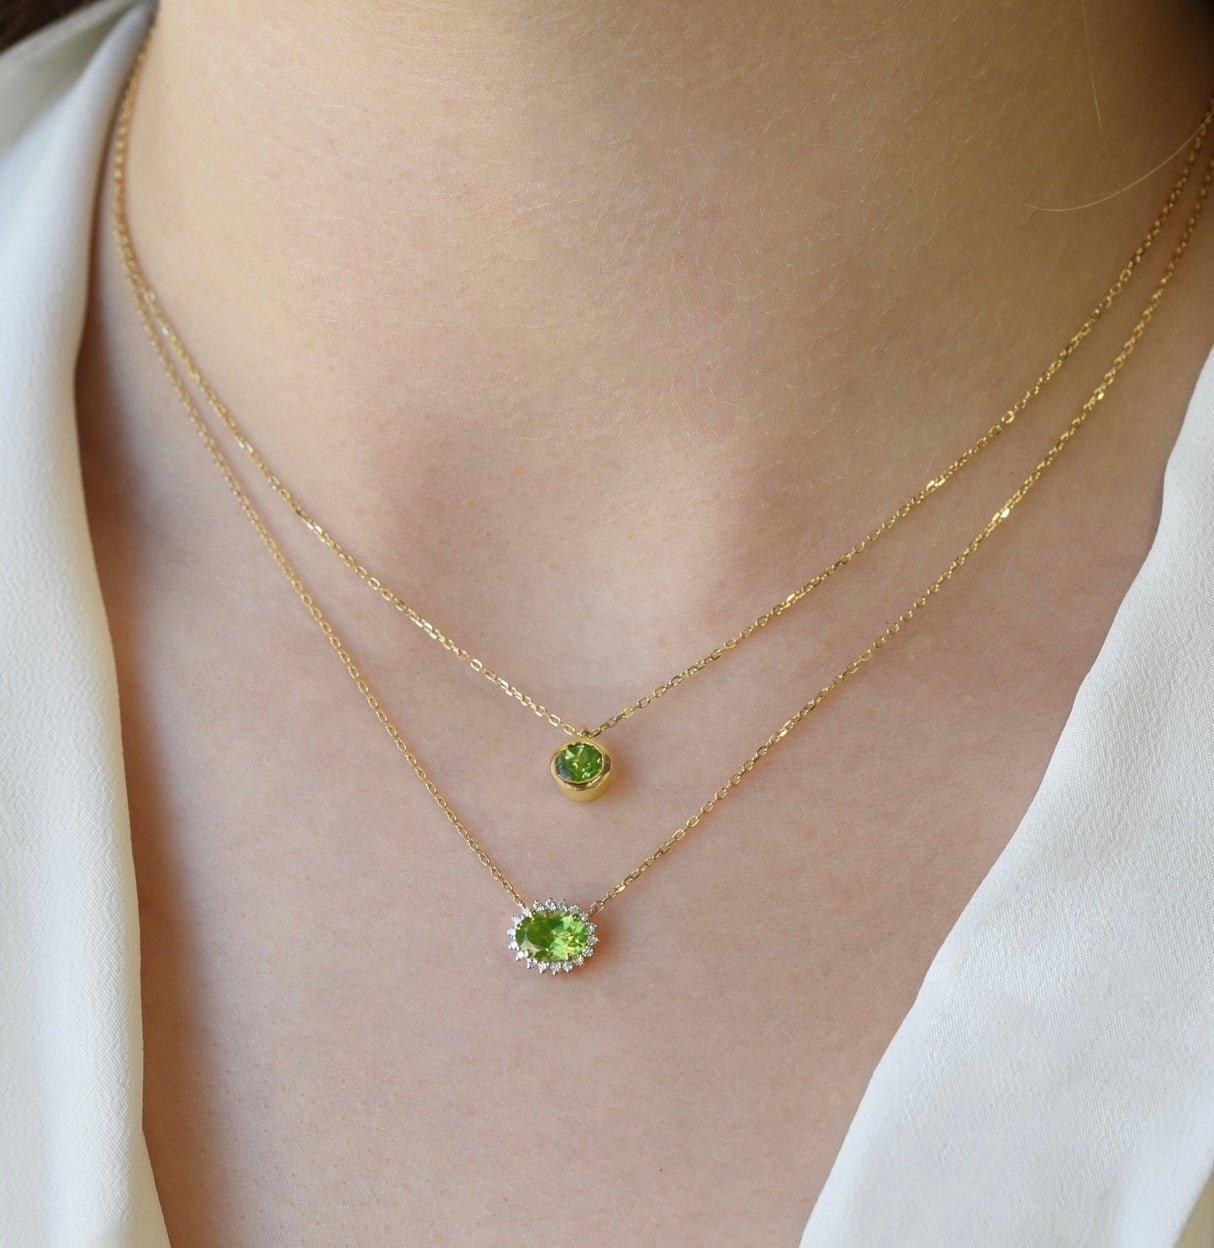 Polka Necklace in Peridot - 18k Gold - Ly